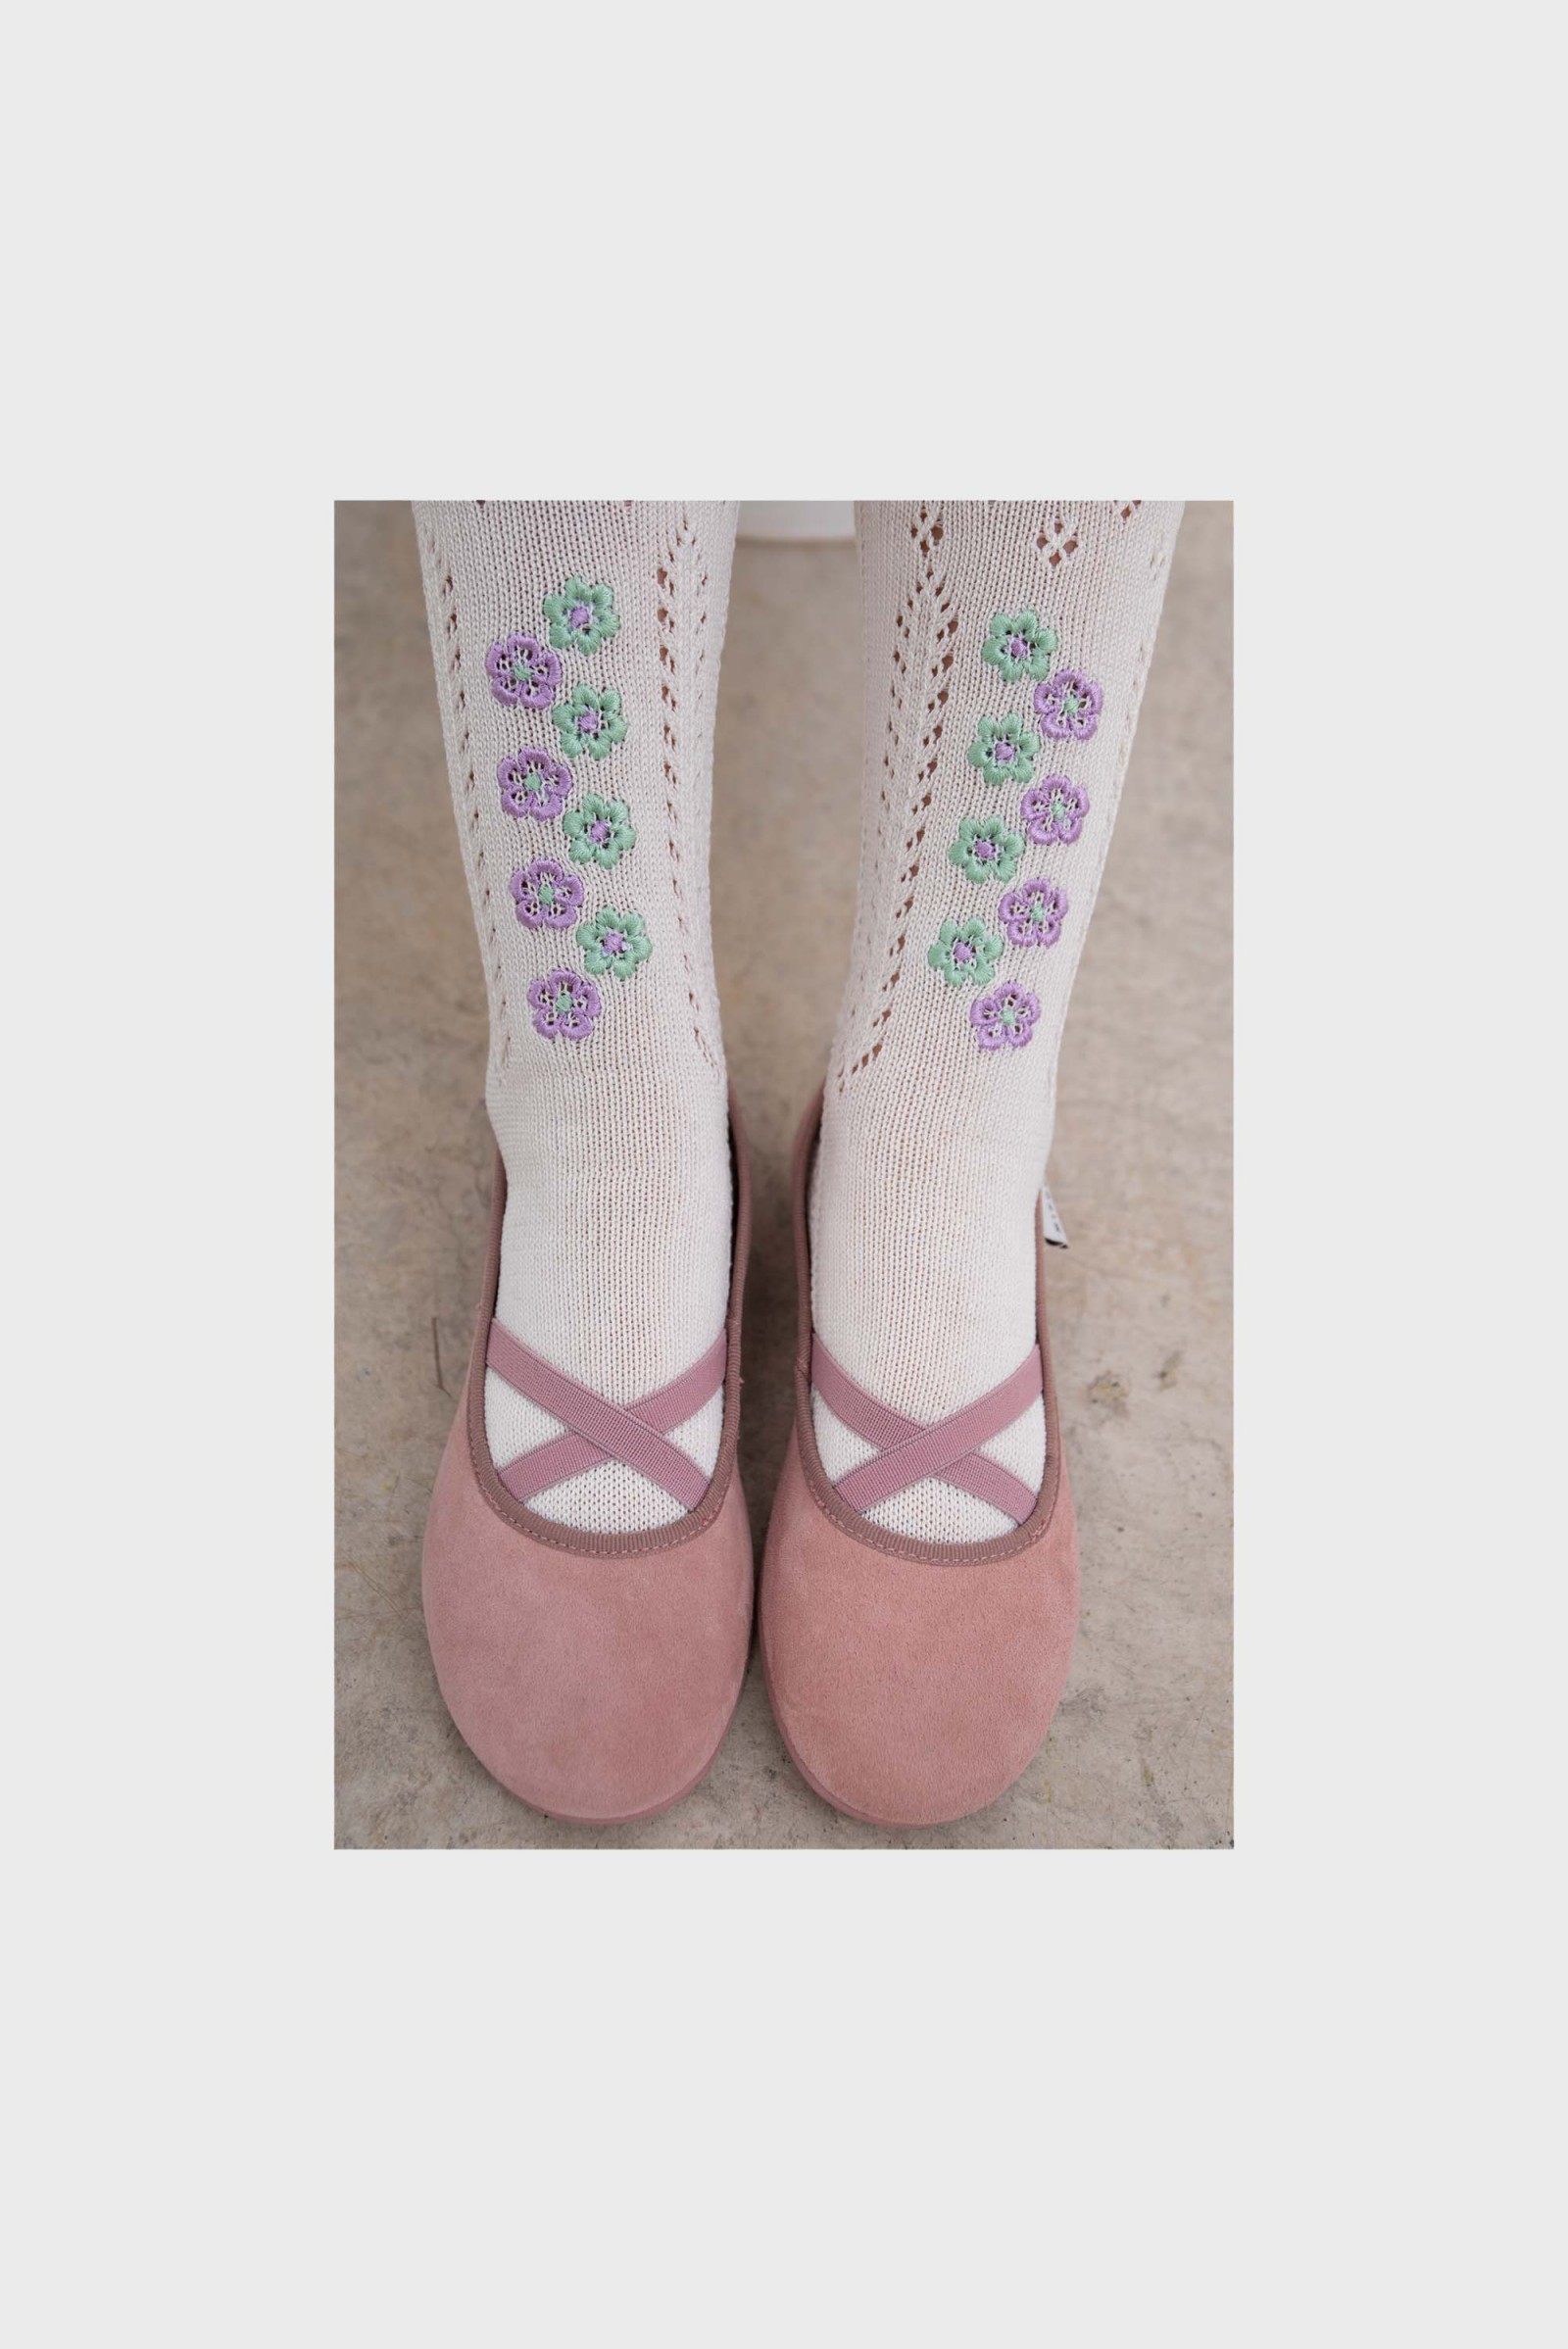 EMBROIDERED COTTON SOCKS